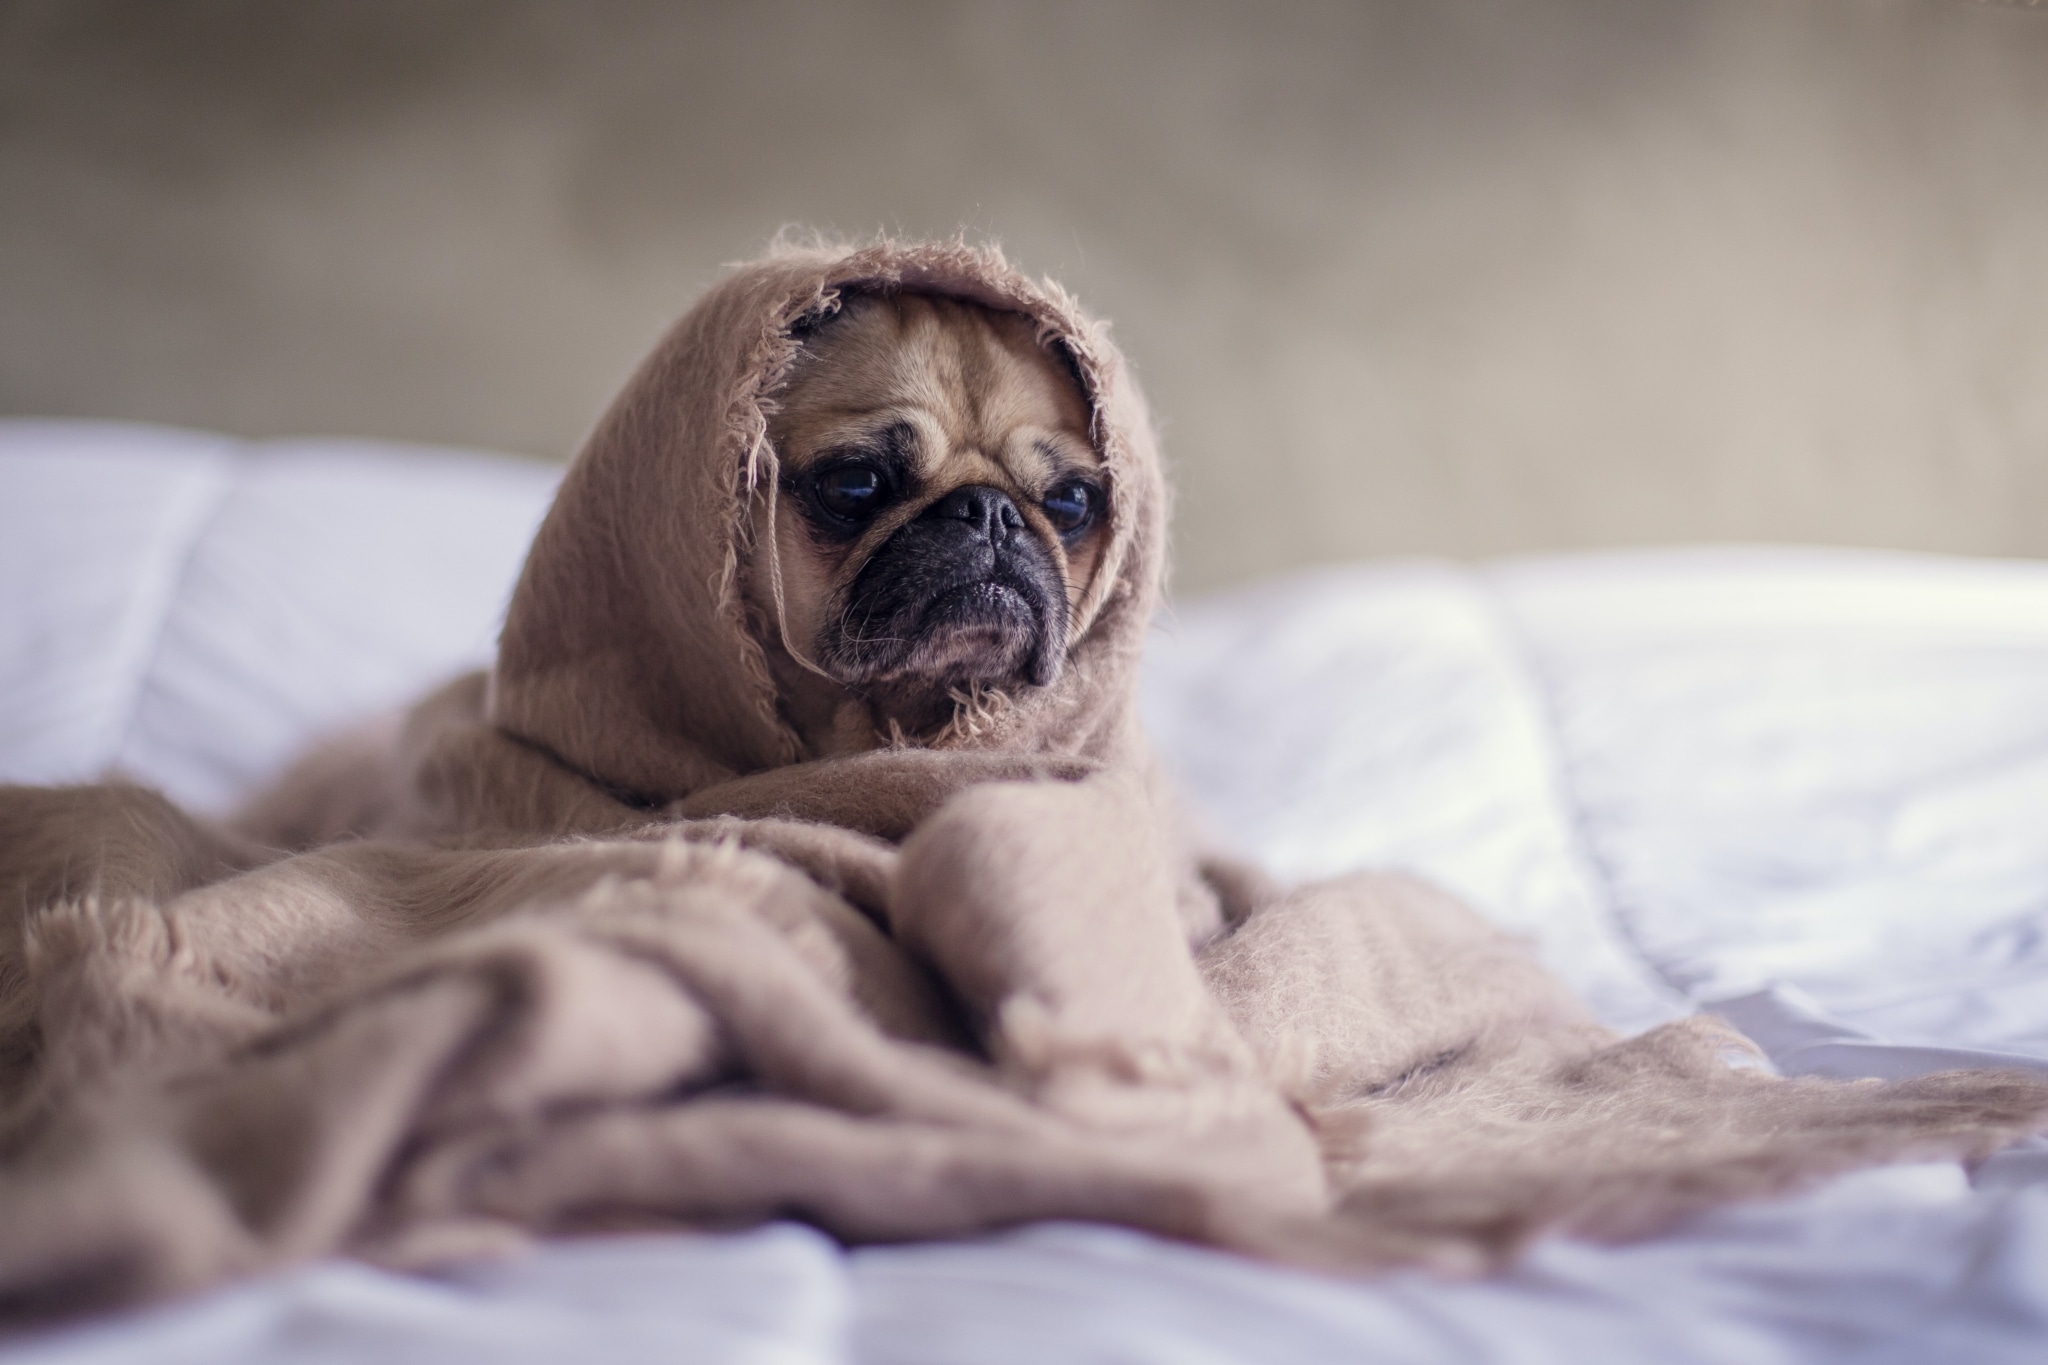 matthew henry 2Ts5HnA67k8 unsplash scaled It's official: dogs are at risk for COVID. Here's what you should know